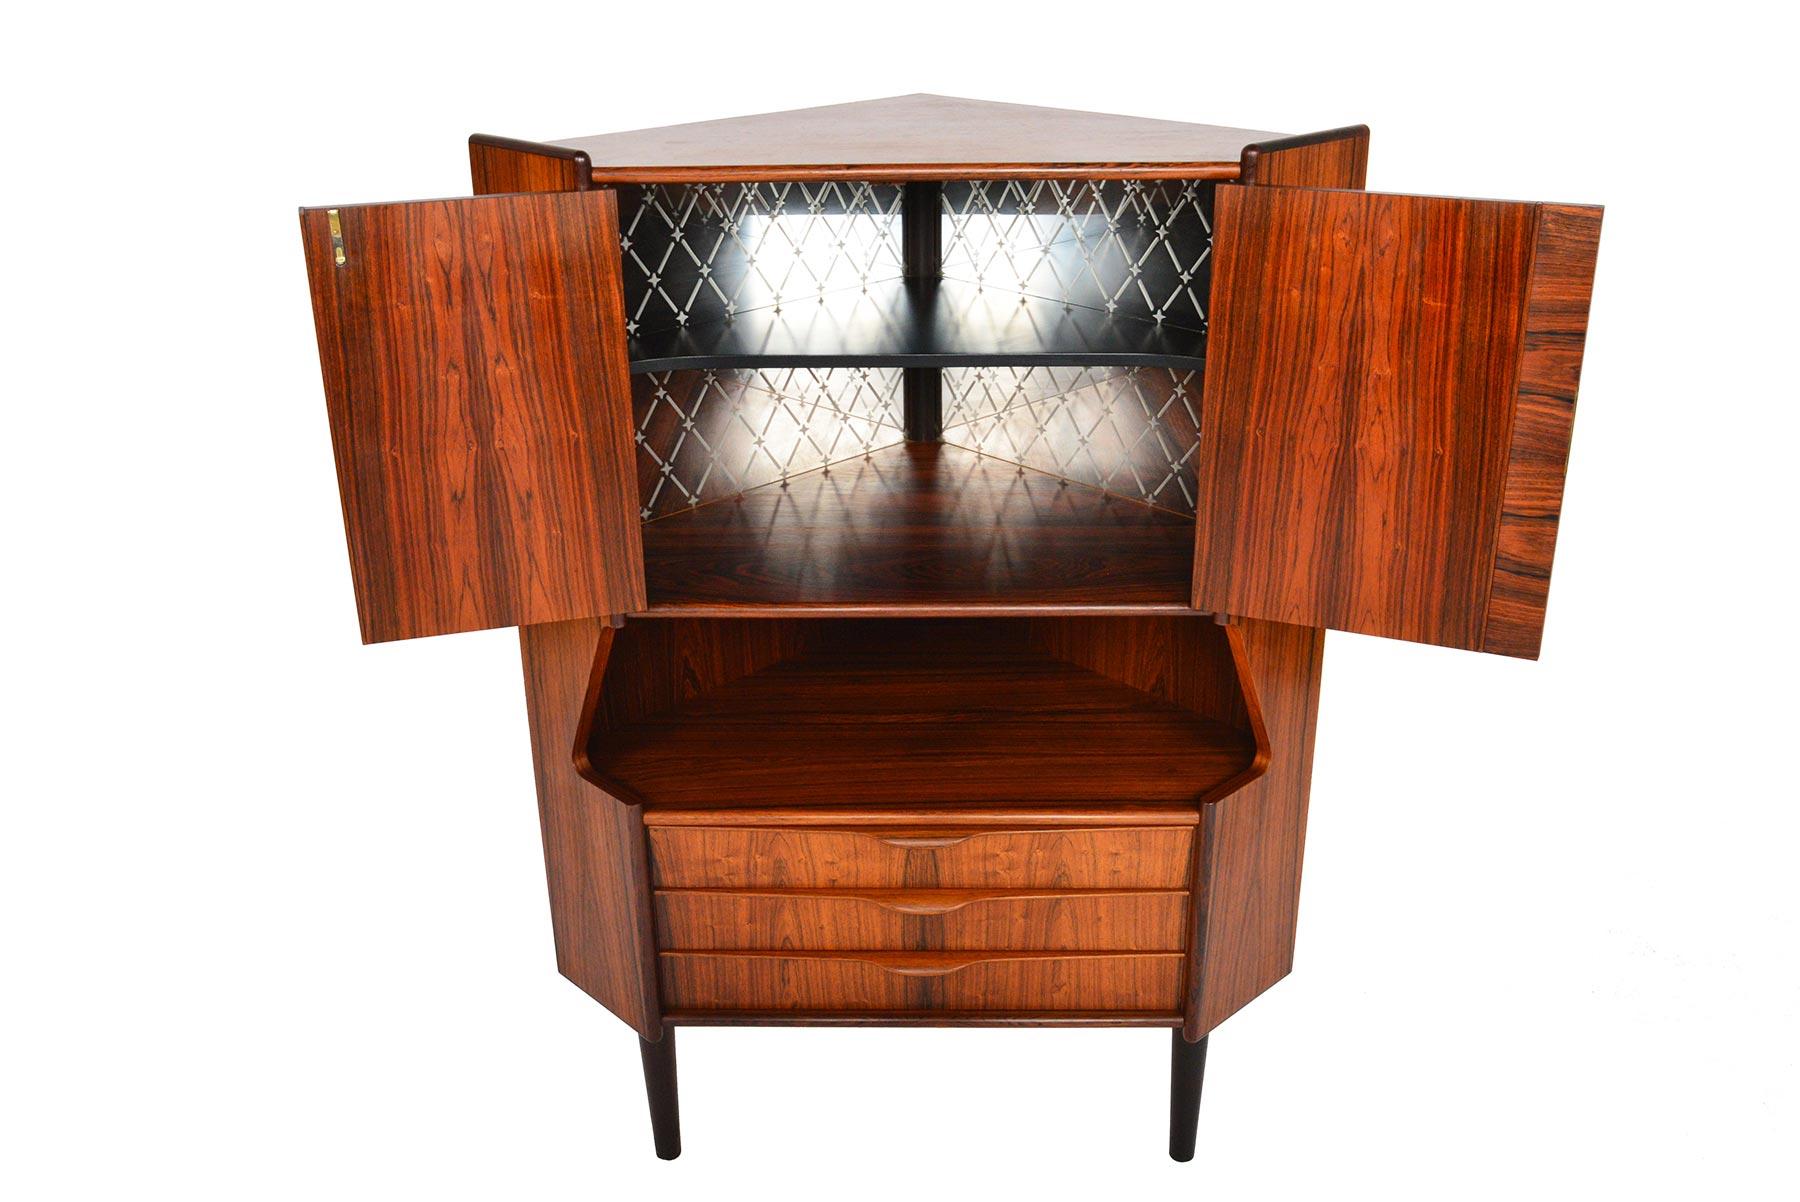 This fabulous Danish modern midcentury corner bar in Brazilian rosewood was designed by Gunni Omann for Omann Jun Møbelfabrik in the 1960s. This sharp piece features two locking cabinet doors which open to an etched, mirror backed bar cabinet